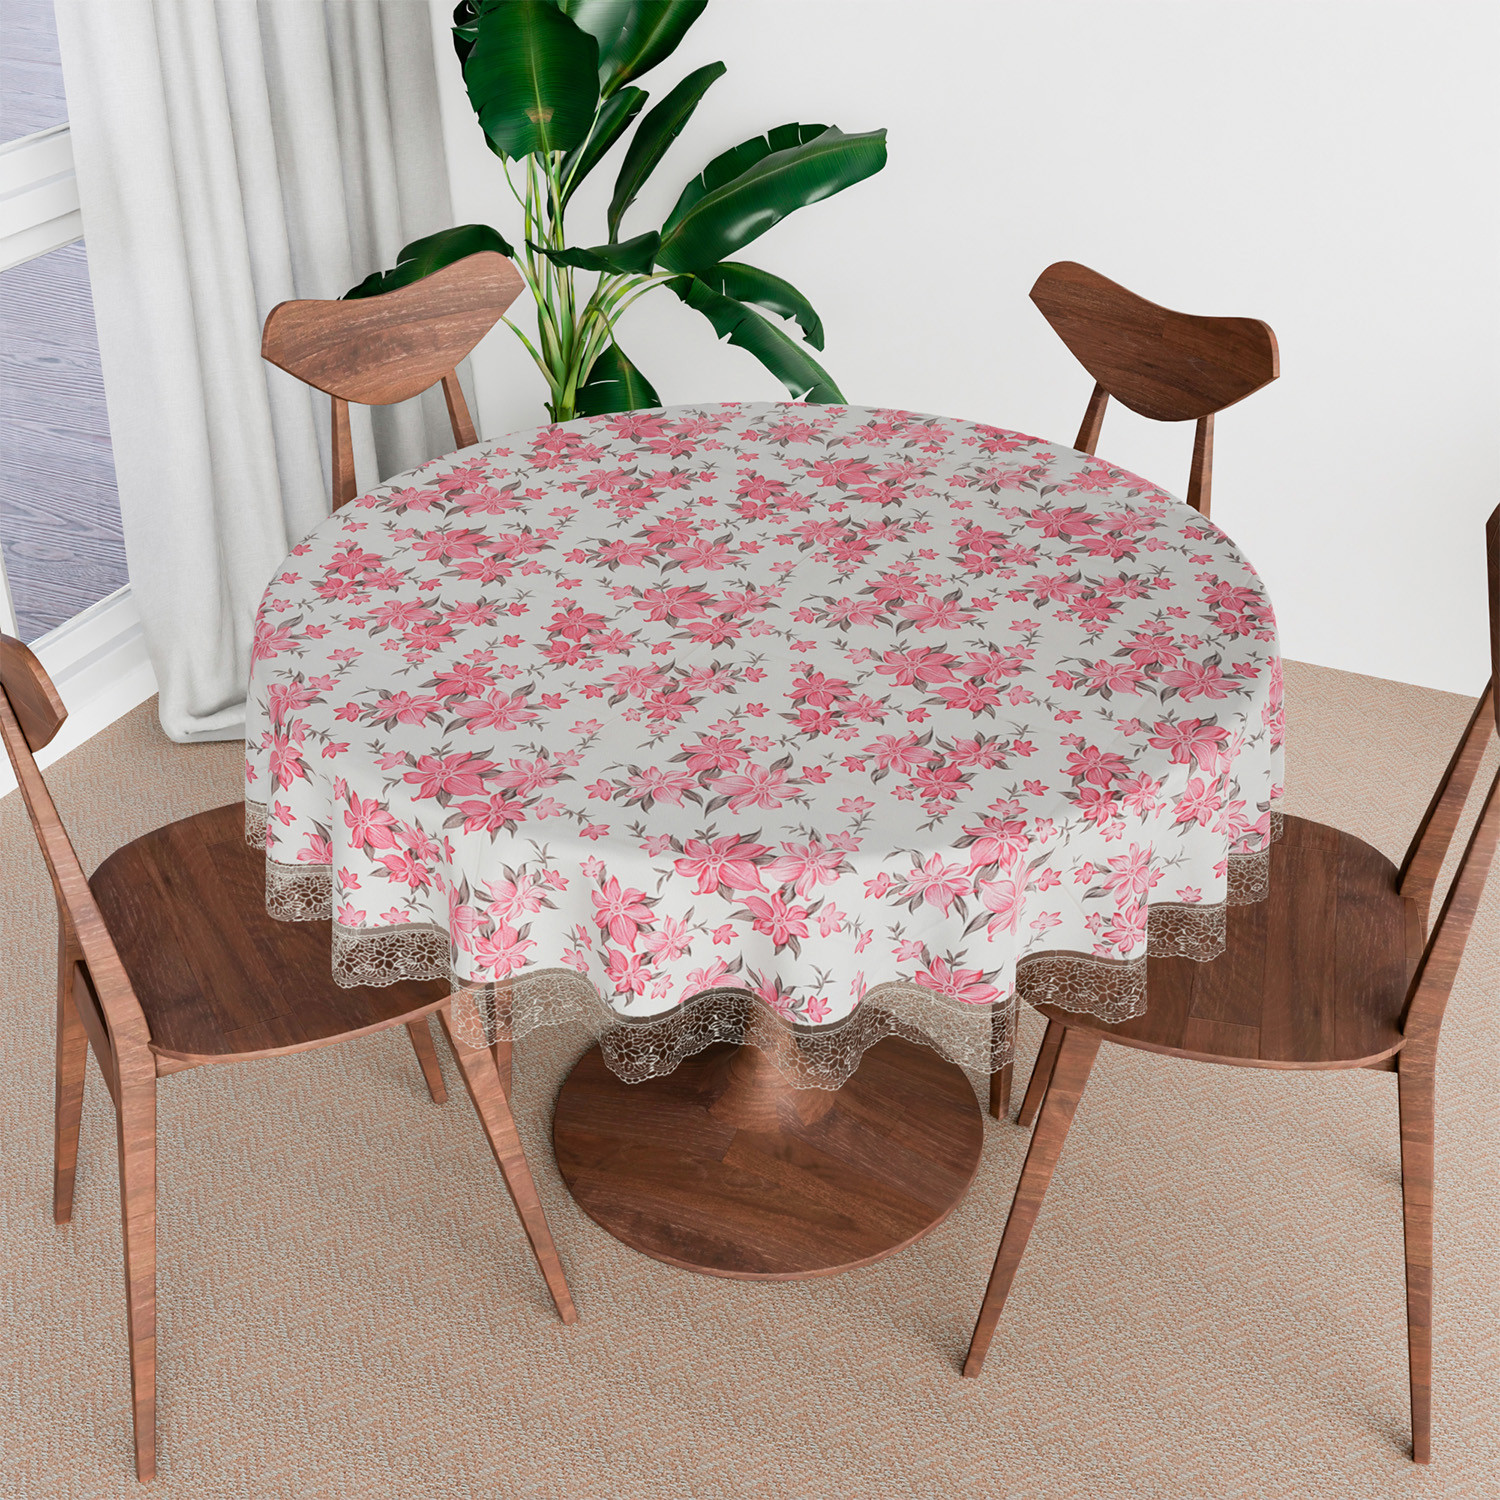 Kuber Industries Round Table Cover | Table Cloth for Round Tables | 4 Seater Round Table Cloth | Barik Flower Kitchen Dining Tablecloth | Tabletop Cover | 60 Inch | Pink